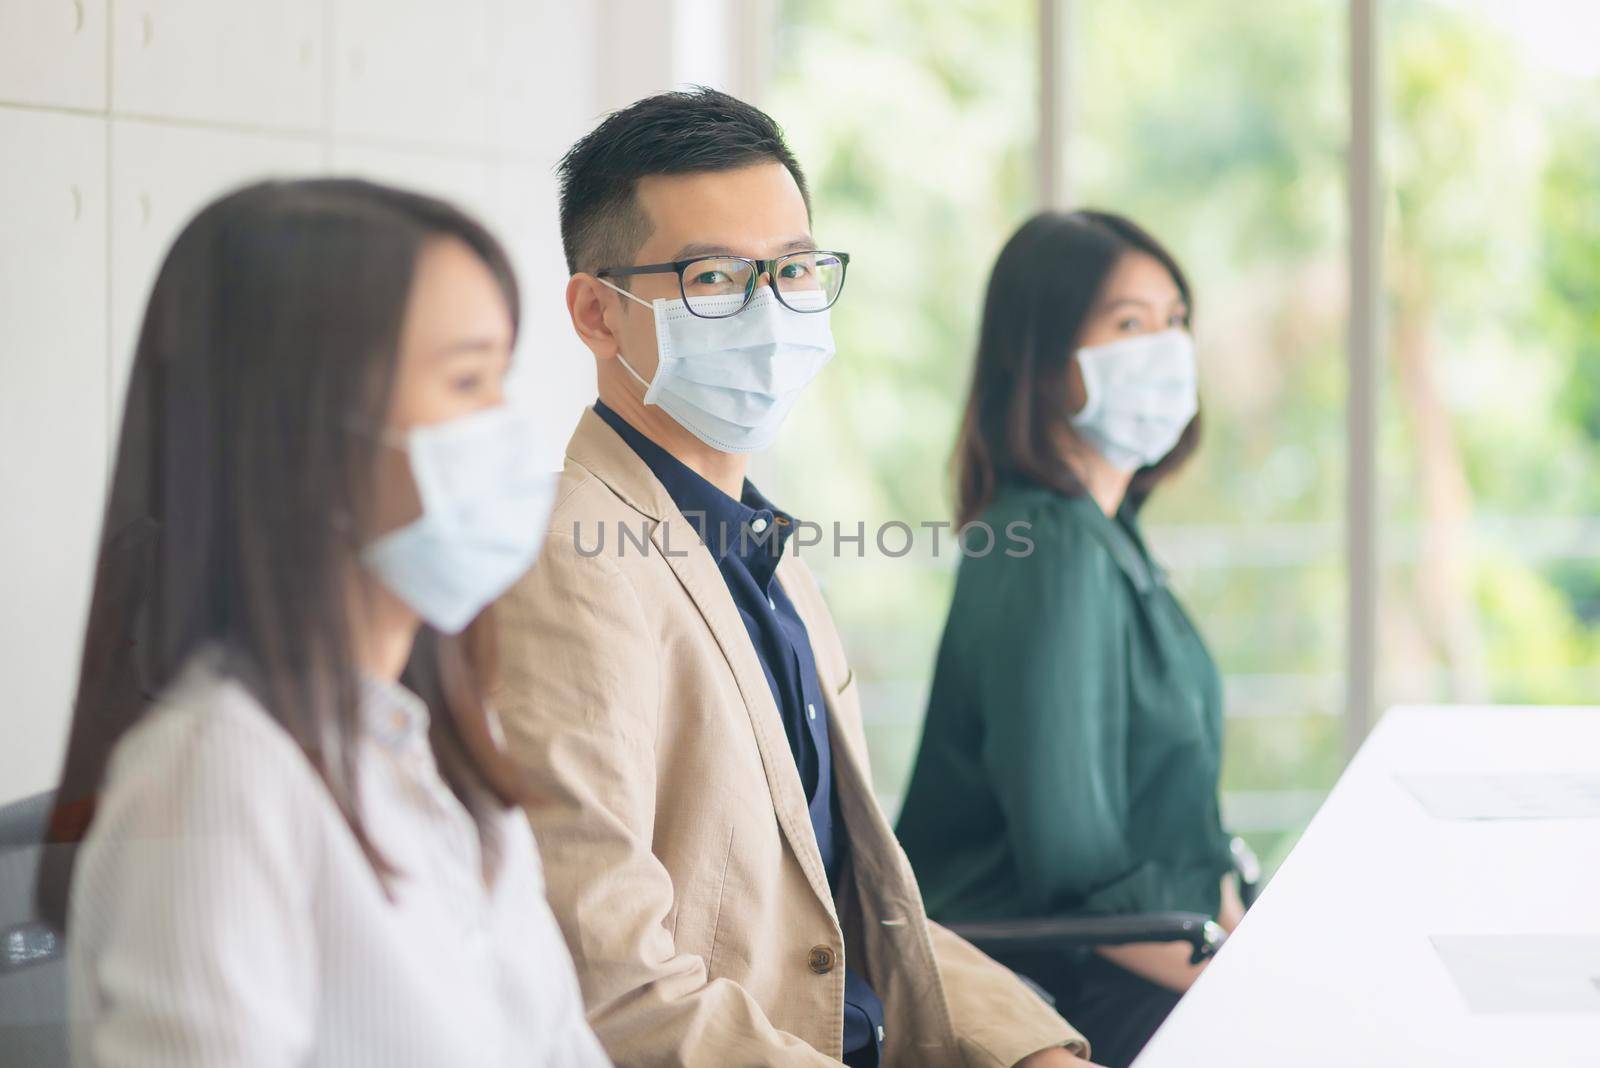 Business employees wearing mask during work in office to keep hygiene follow company policy by Nuamfolio